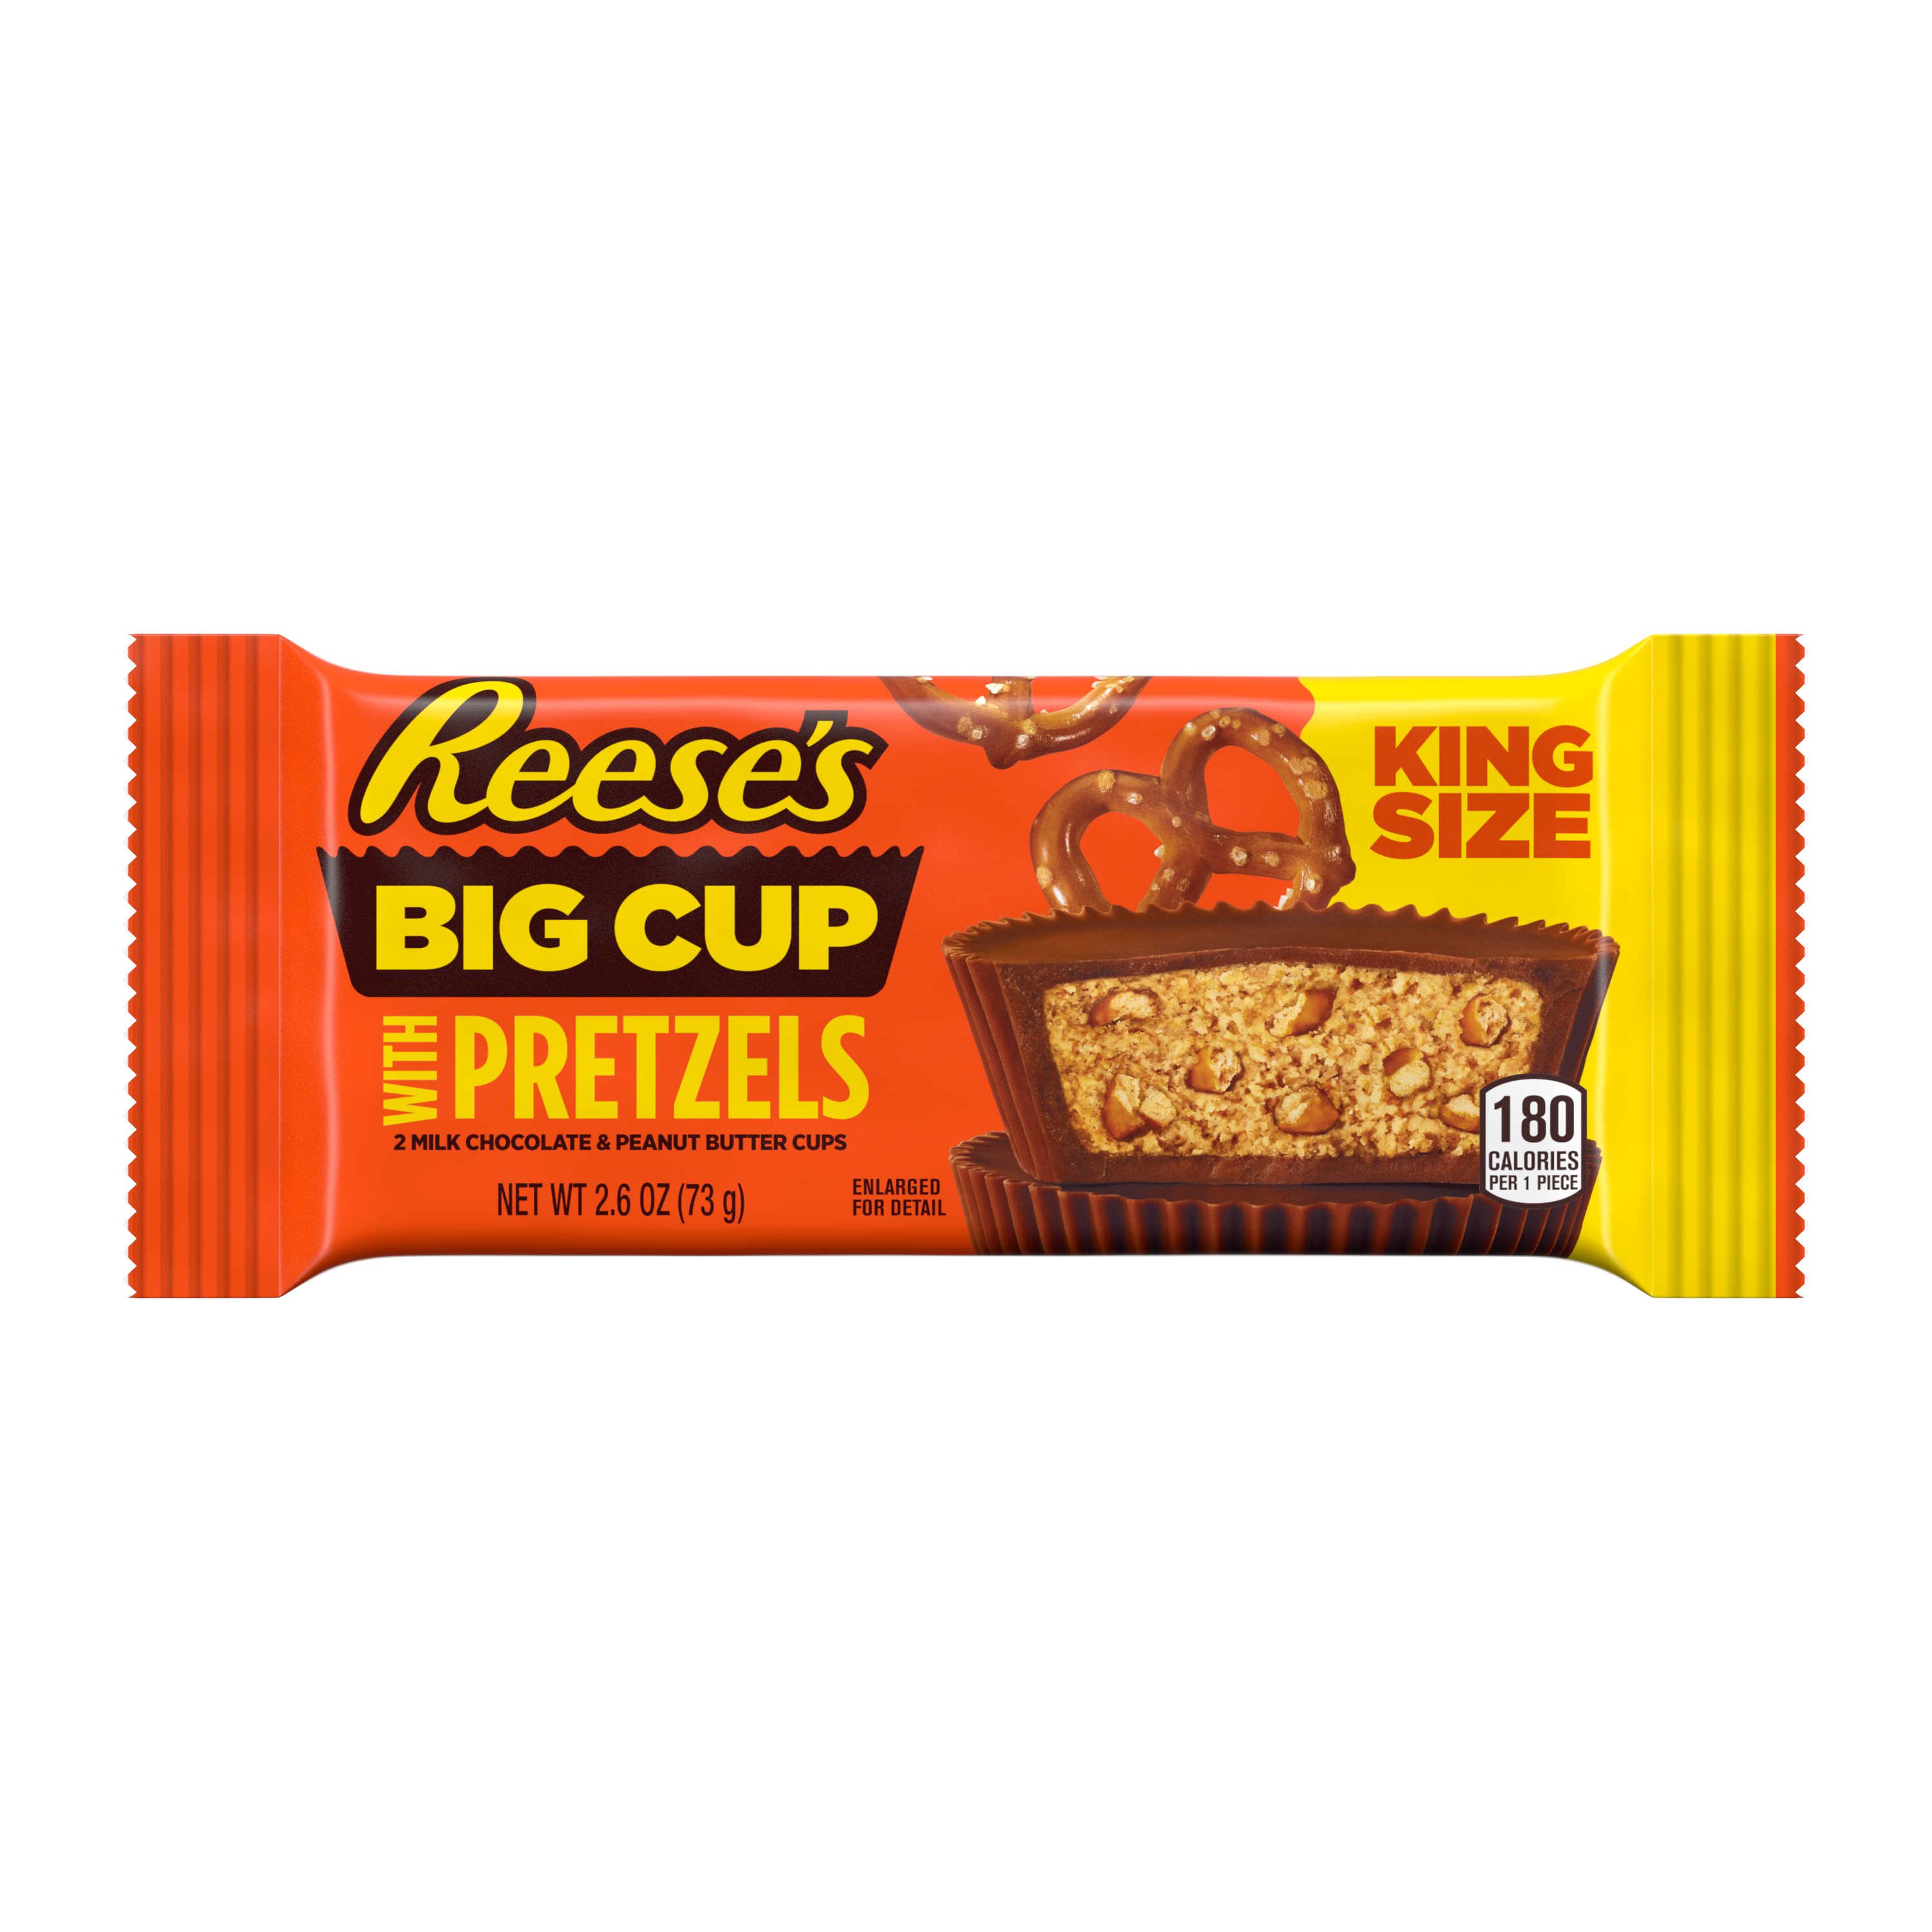 REESE'S Big Cup with Pretzels King Size Peanut Butter Cups, 2.6 oz - Front of Package